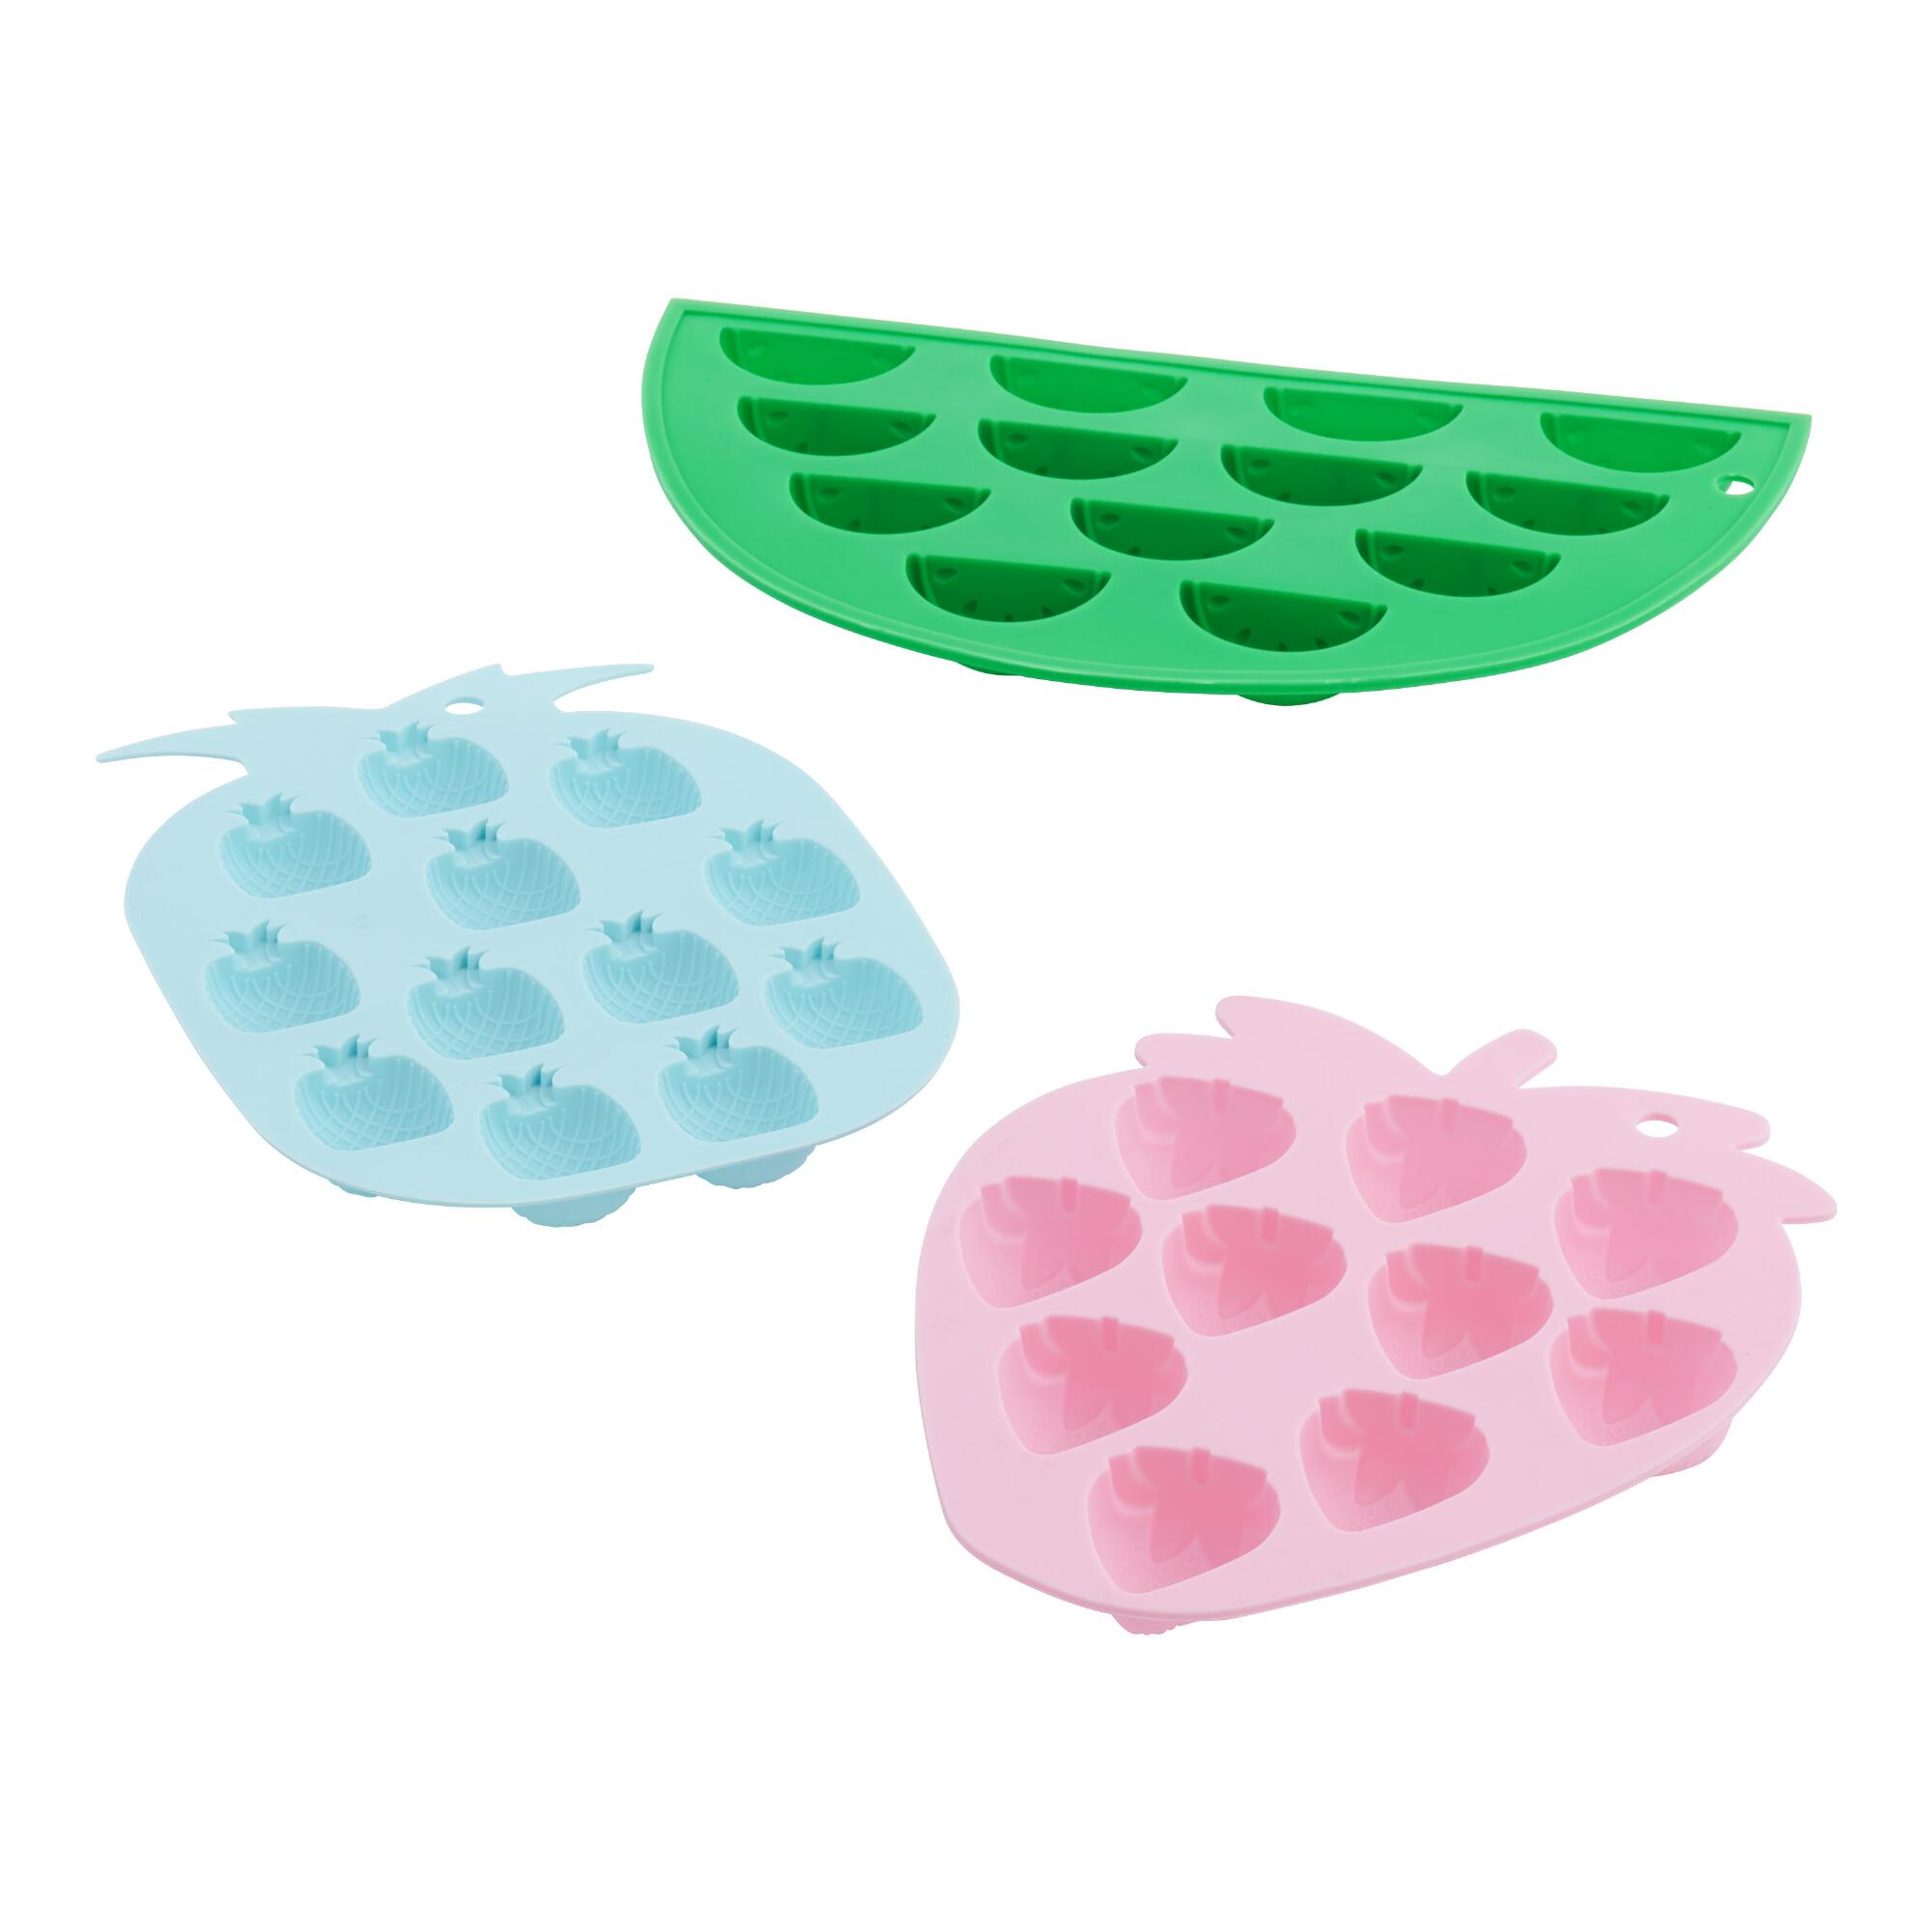 Fruit Shaped Silicone Ice Tray Set of 3: Blue/Green/Pink by World Market